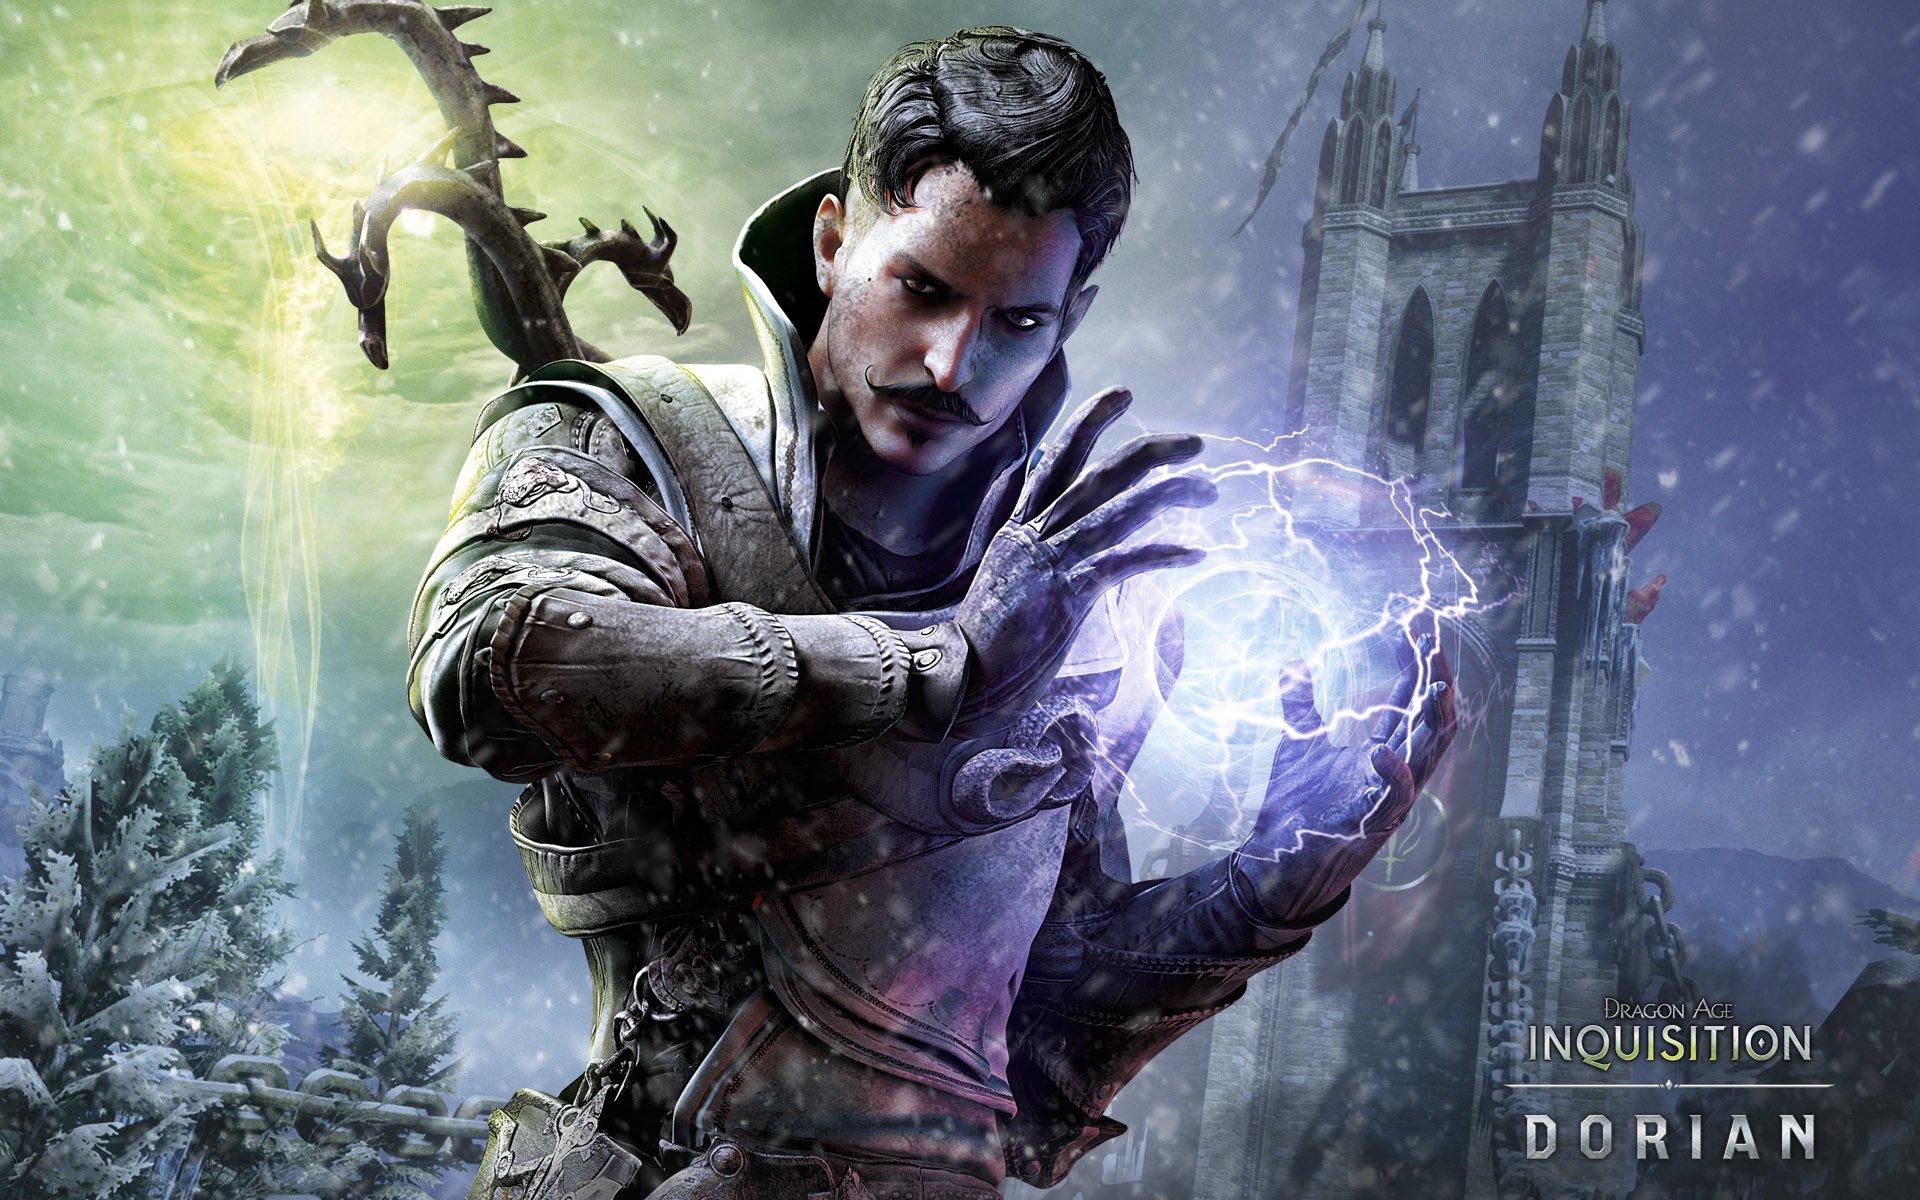 Dragon Age Inquisition Wallpapers Top Free Dragon Age